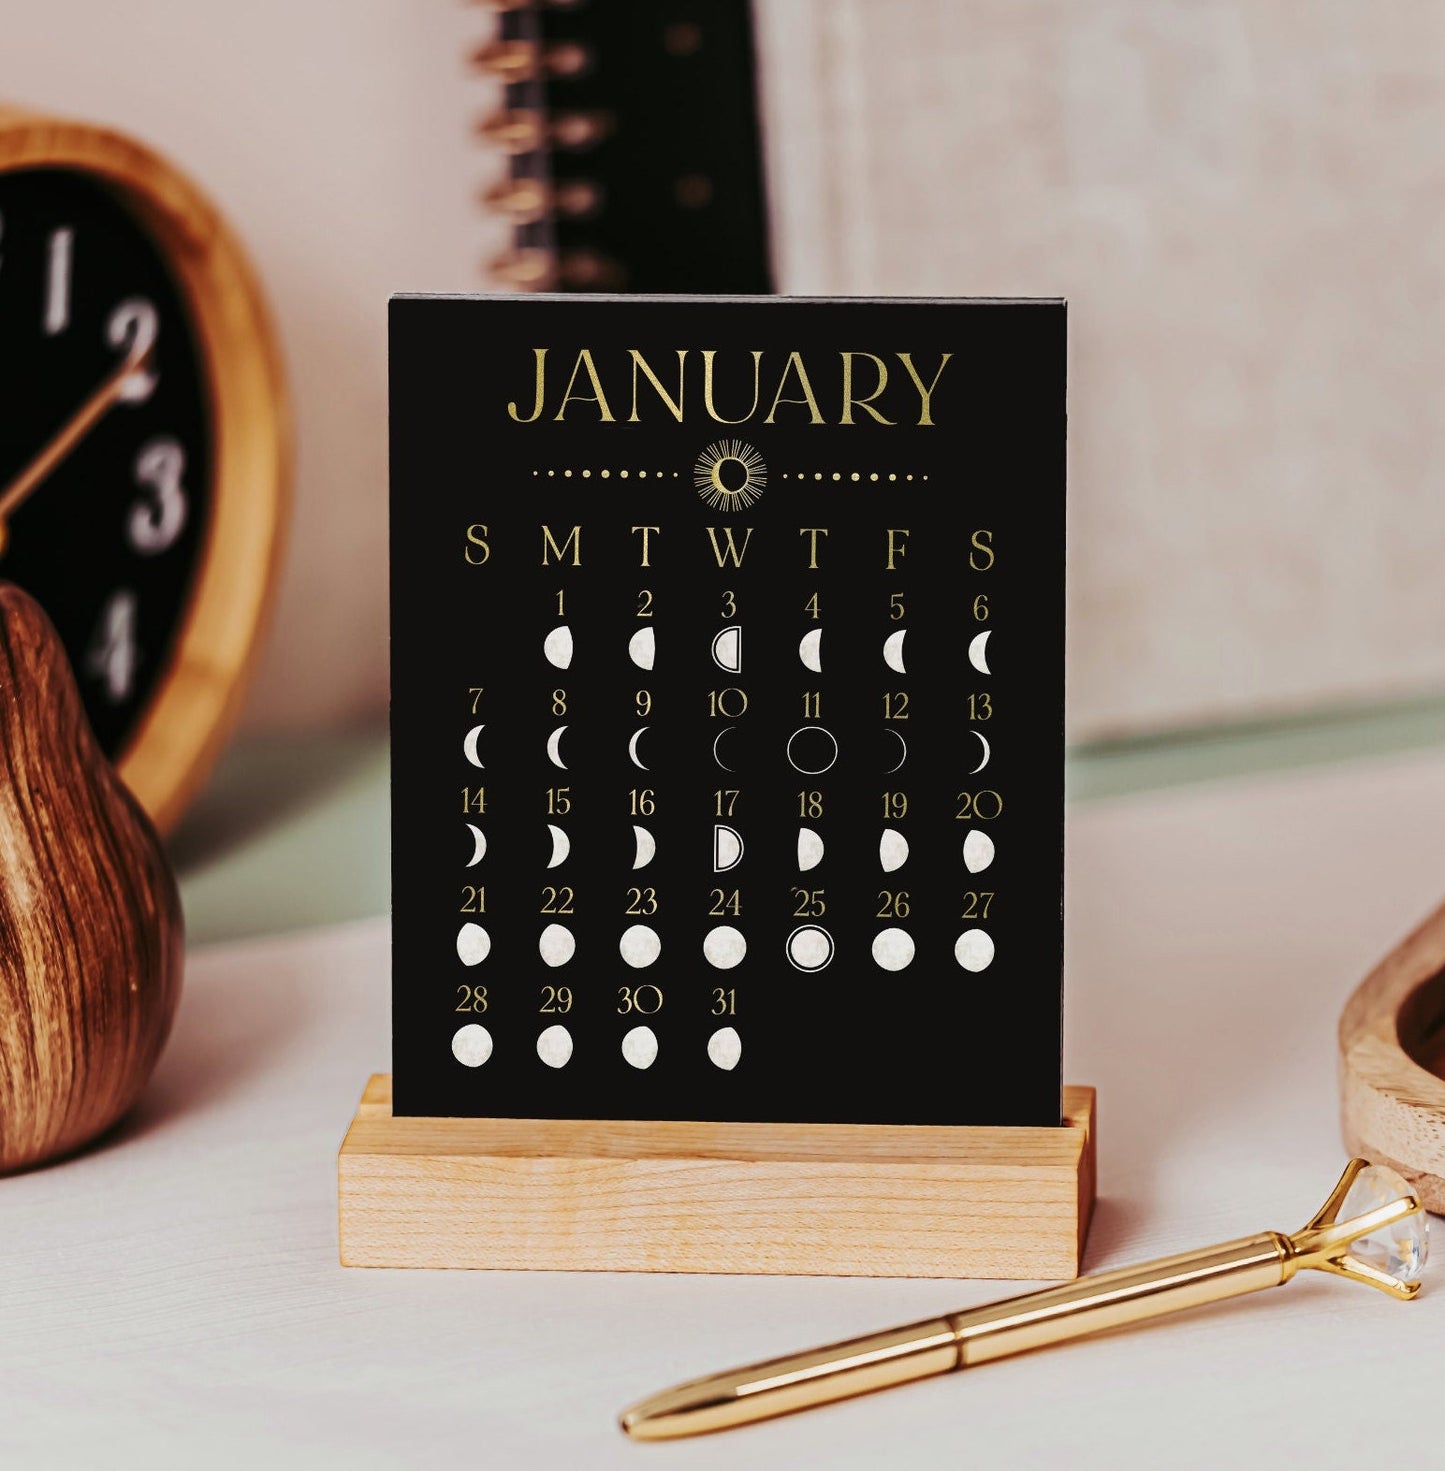 2024 full moon desk calendar with a black background and faux gold font. Each phase of the moon is featured each day of the month. It is a small desk calendar with a maple wood stand